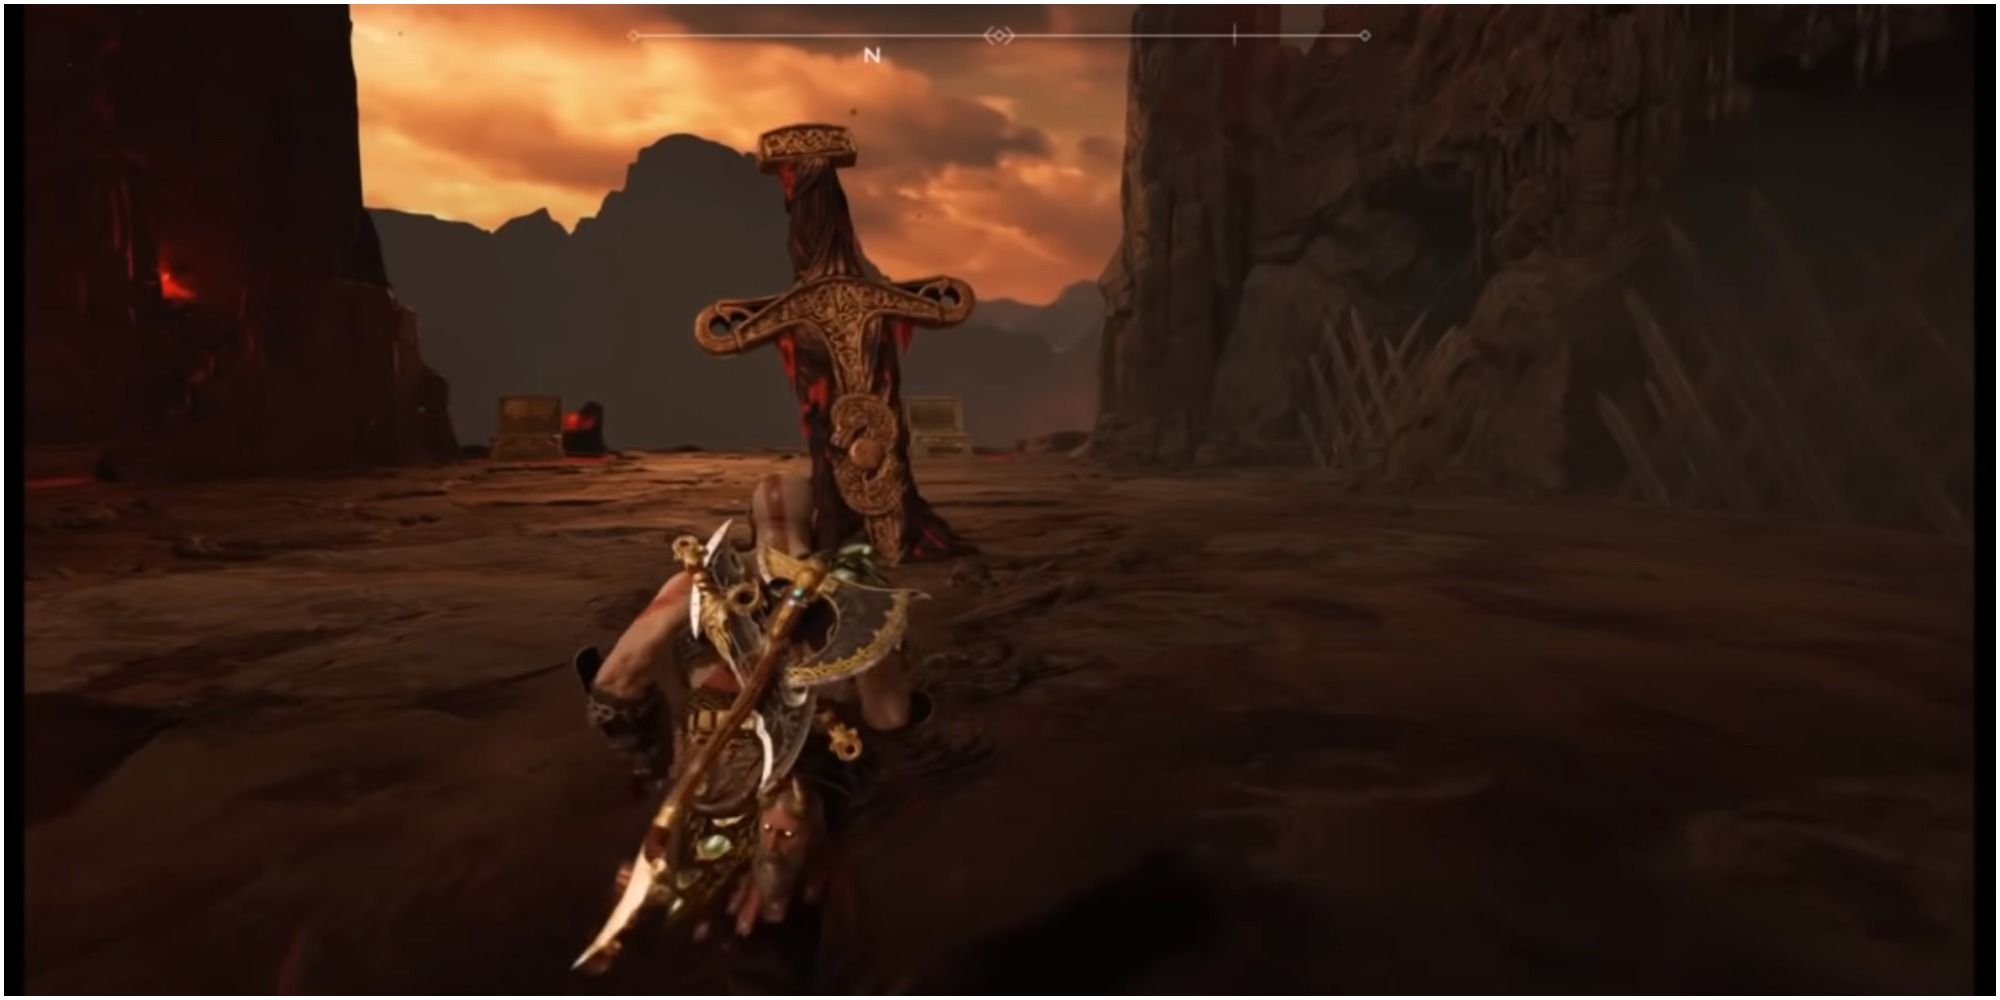 Kratos interacting with the Giant Sword to initiate the trail on Muspelheim.